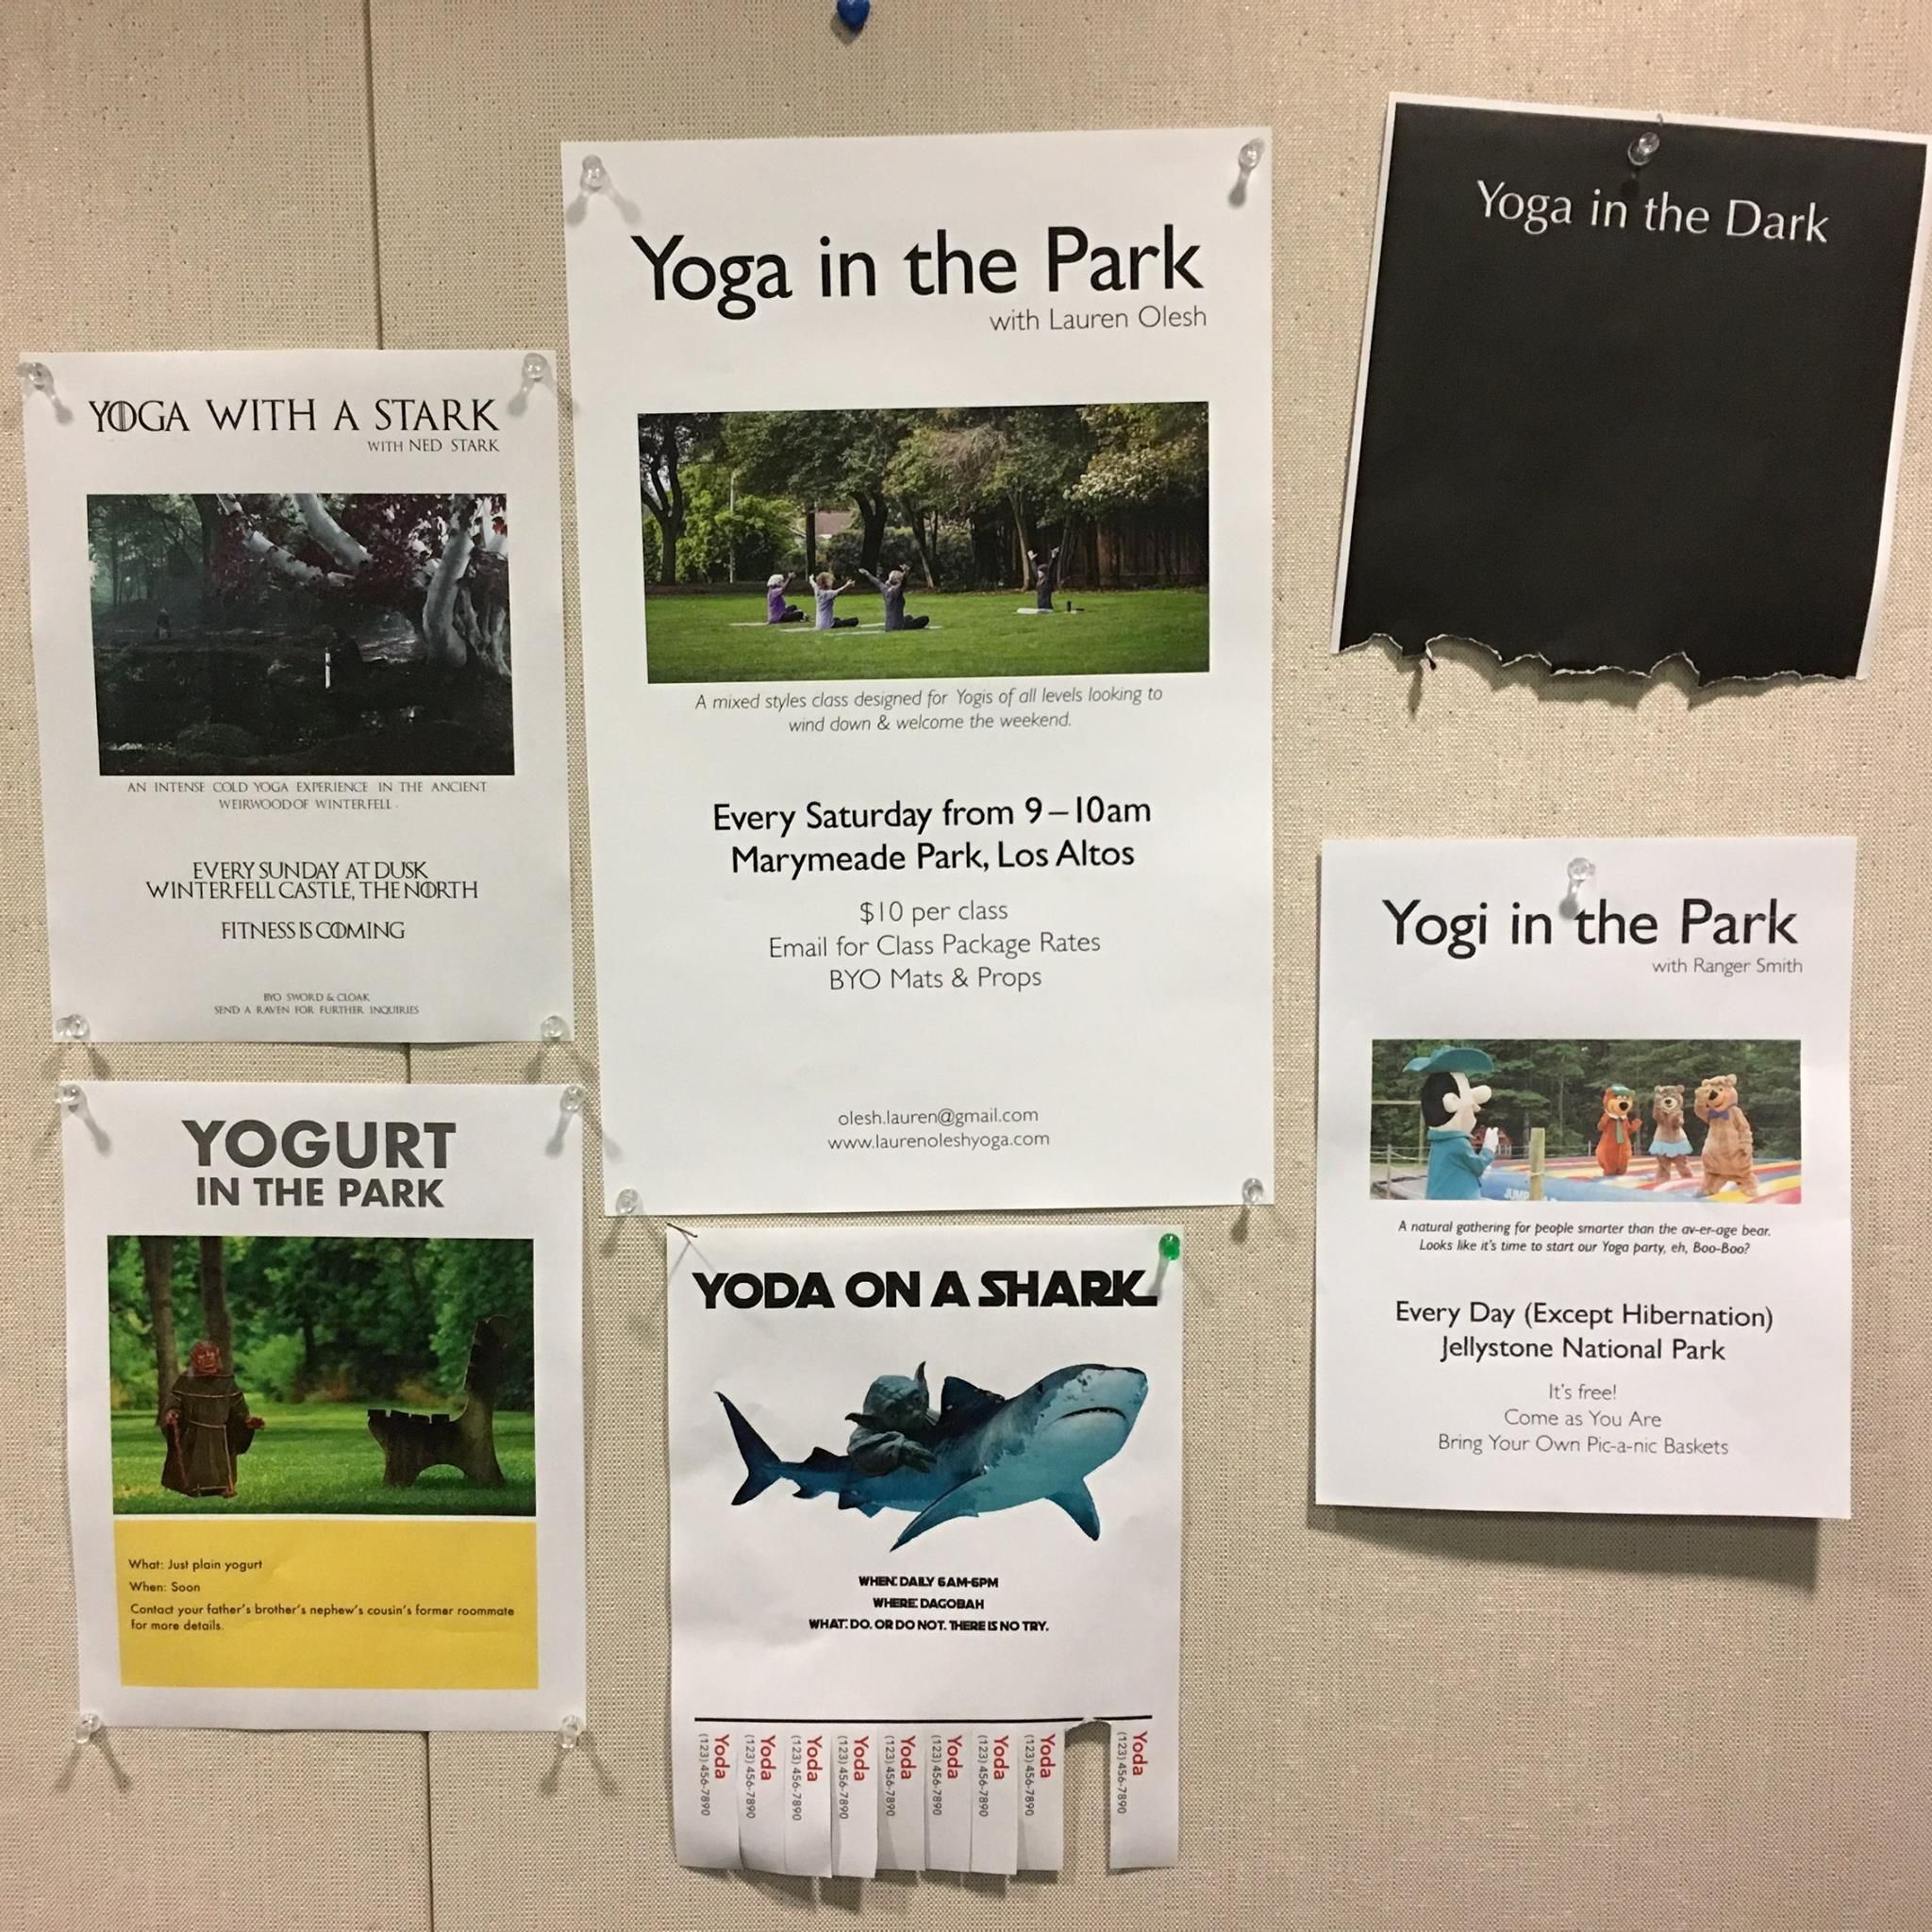 Yoga in the Park?